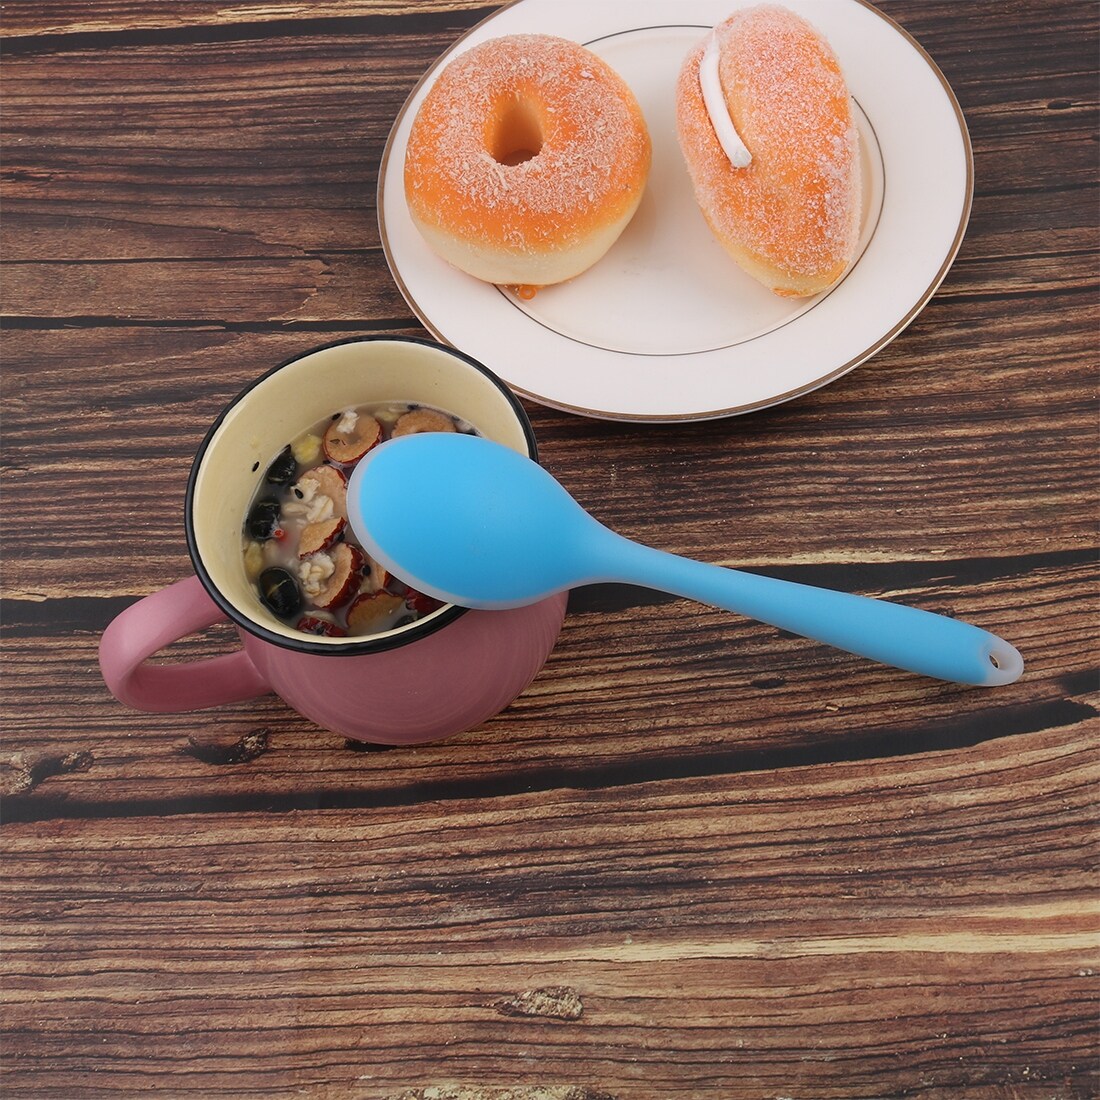 https://ak1.ostkcdn.com/images/products/is/images/direct/f5b3233a04da6b0acdac8188ebc56c51a302c15a/Silicone-Dinner-Dessert-Spoon-Serving-Eating-Utensil.jpg